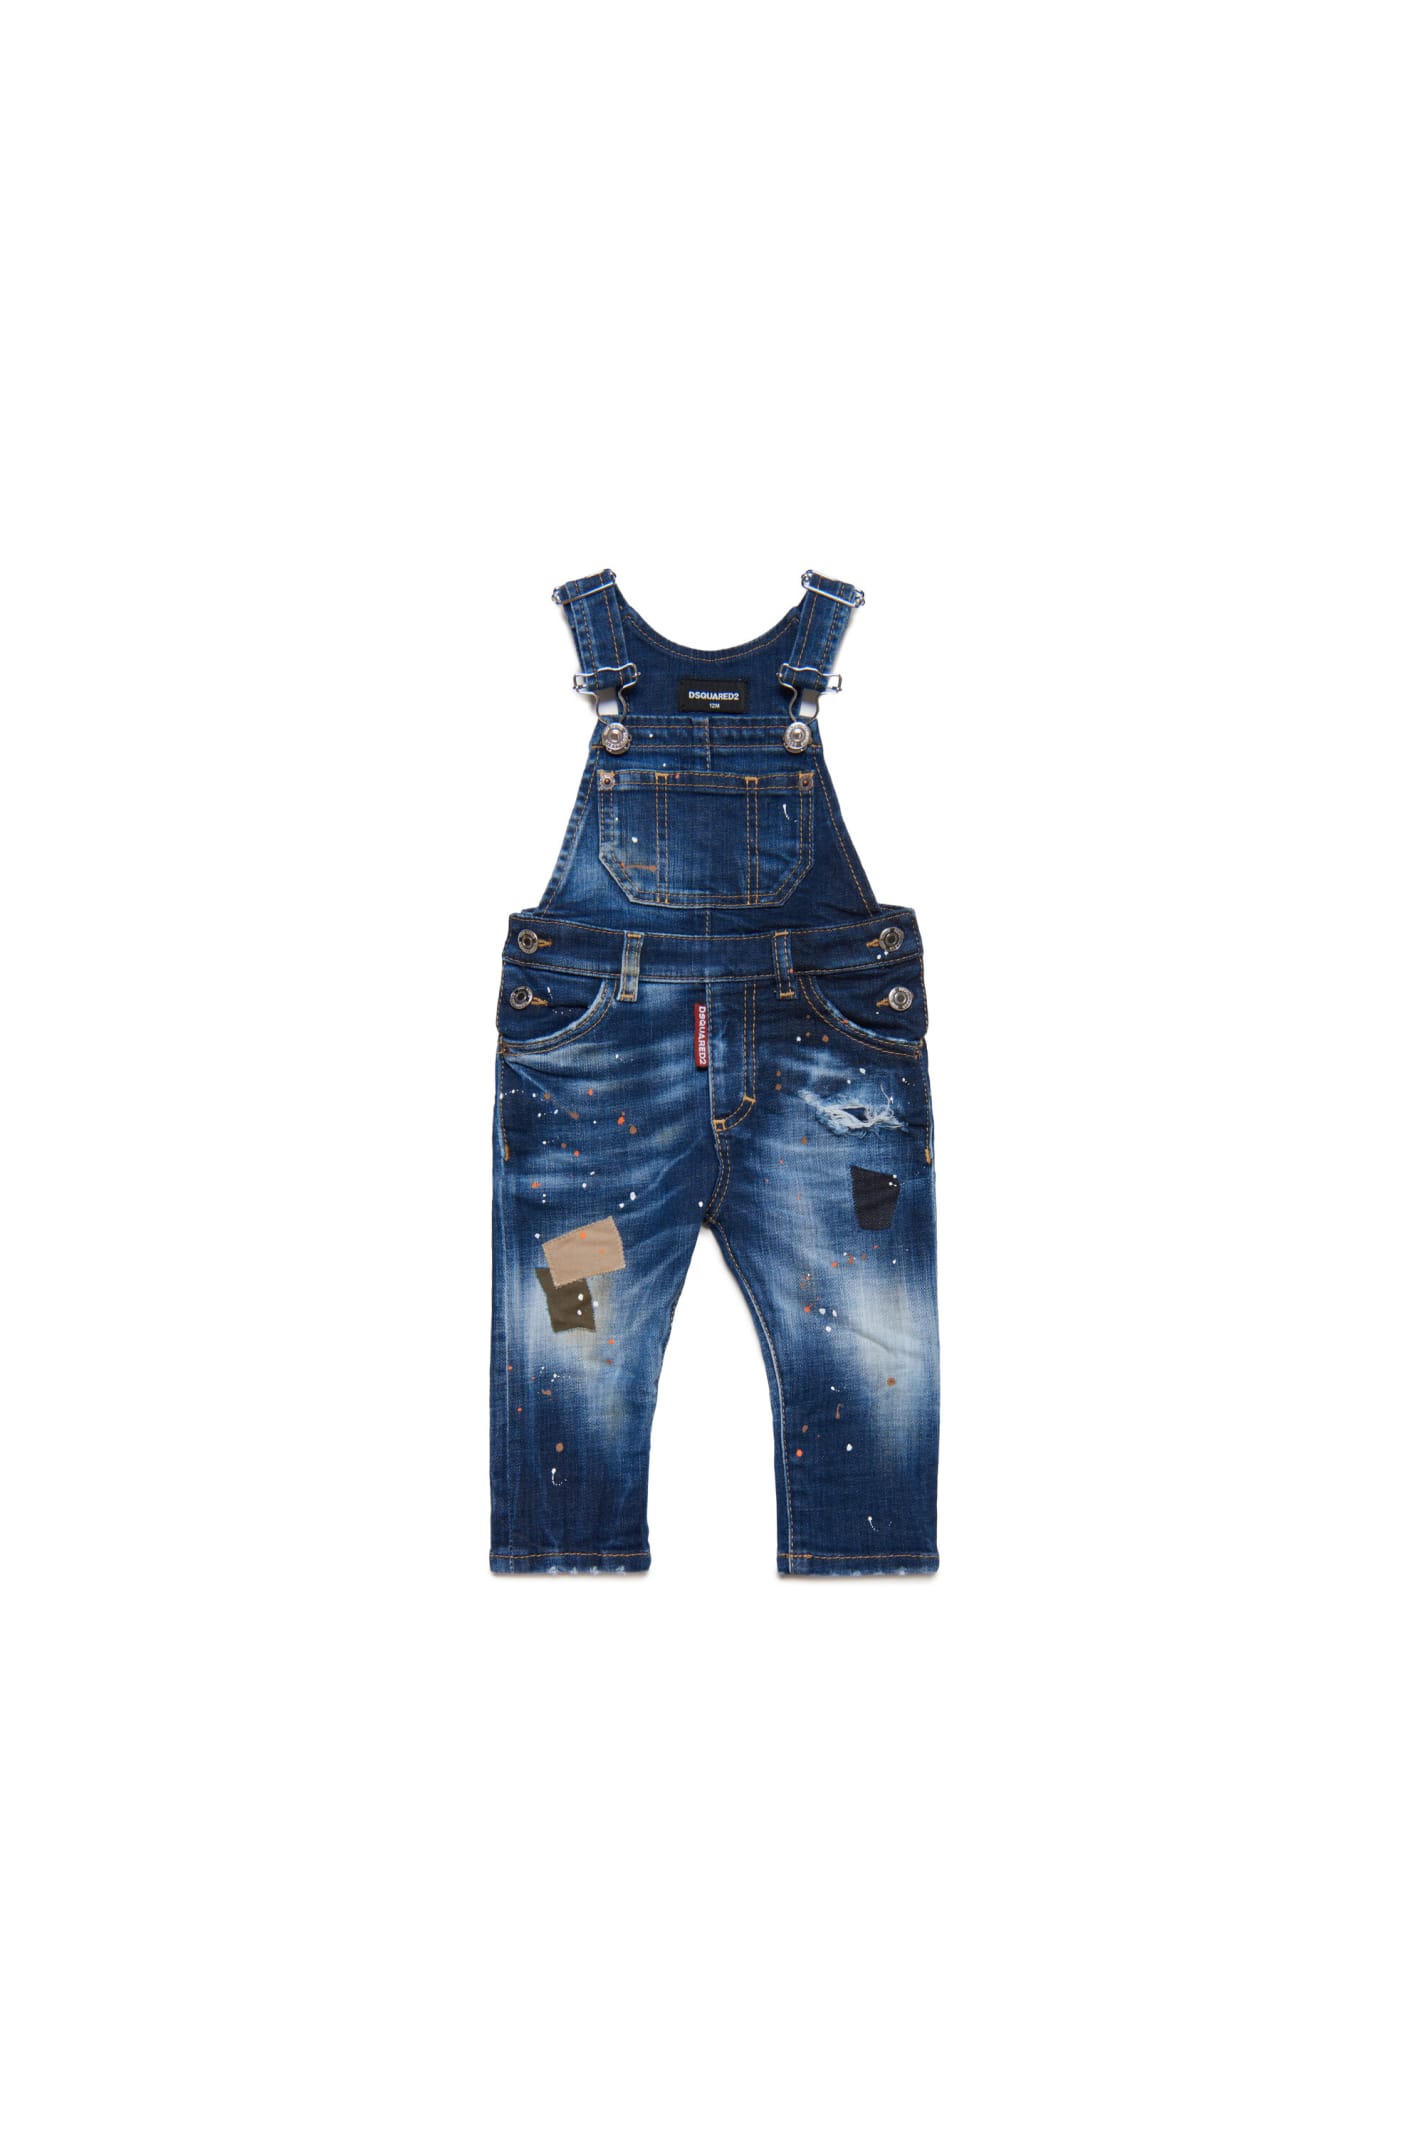 DSQUARED2 D2J217B OVERALLS DSQUARED SHADED DARK BLUE DENIM DUNGAREES WITH PATCHES AND SPOTS